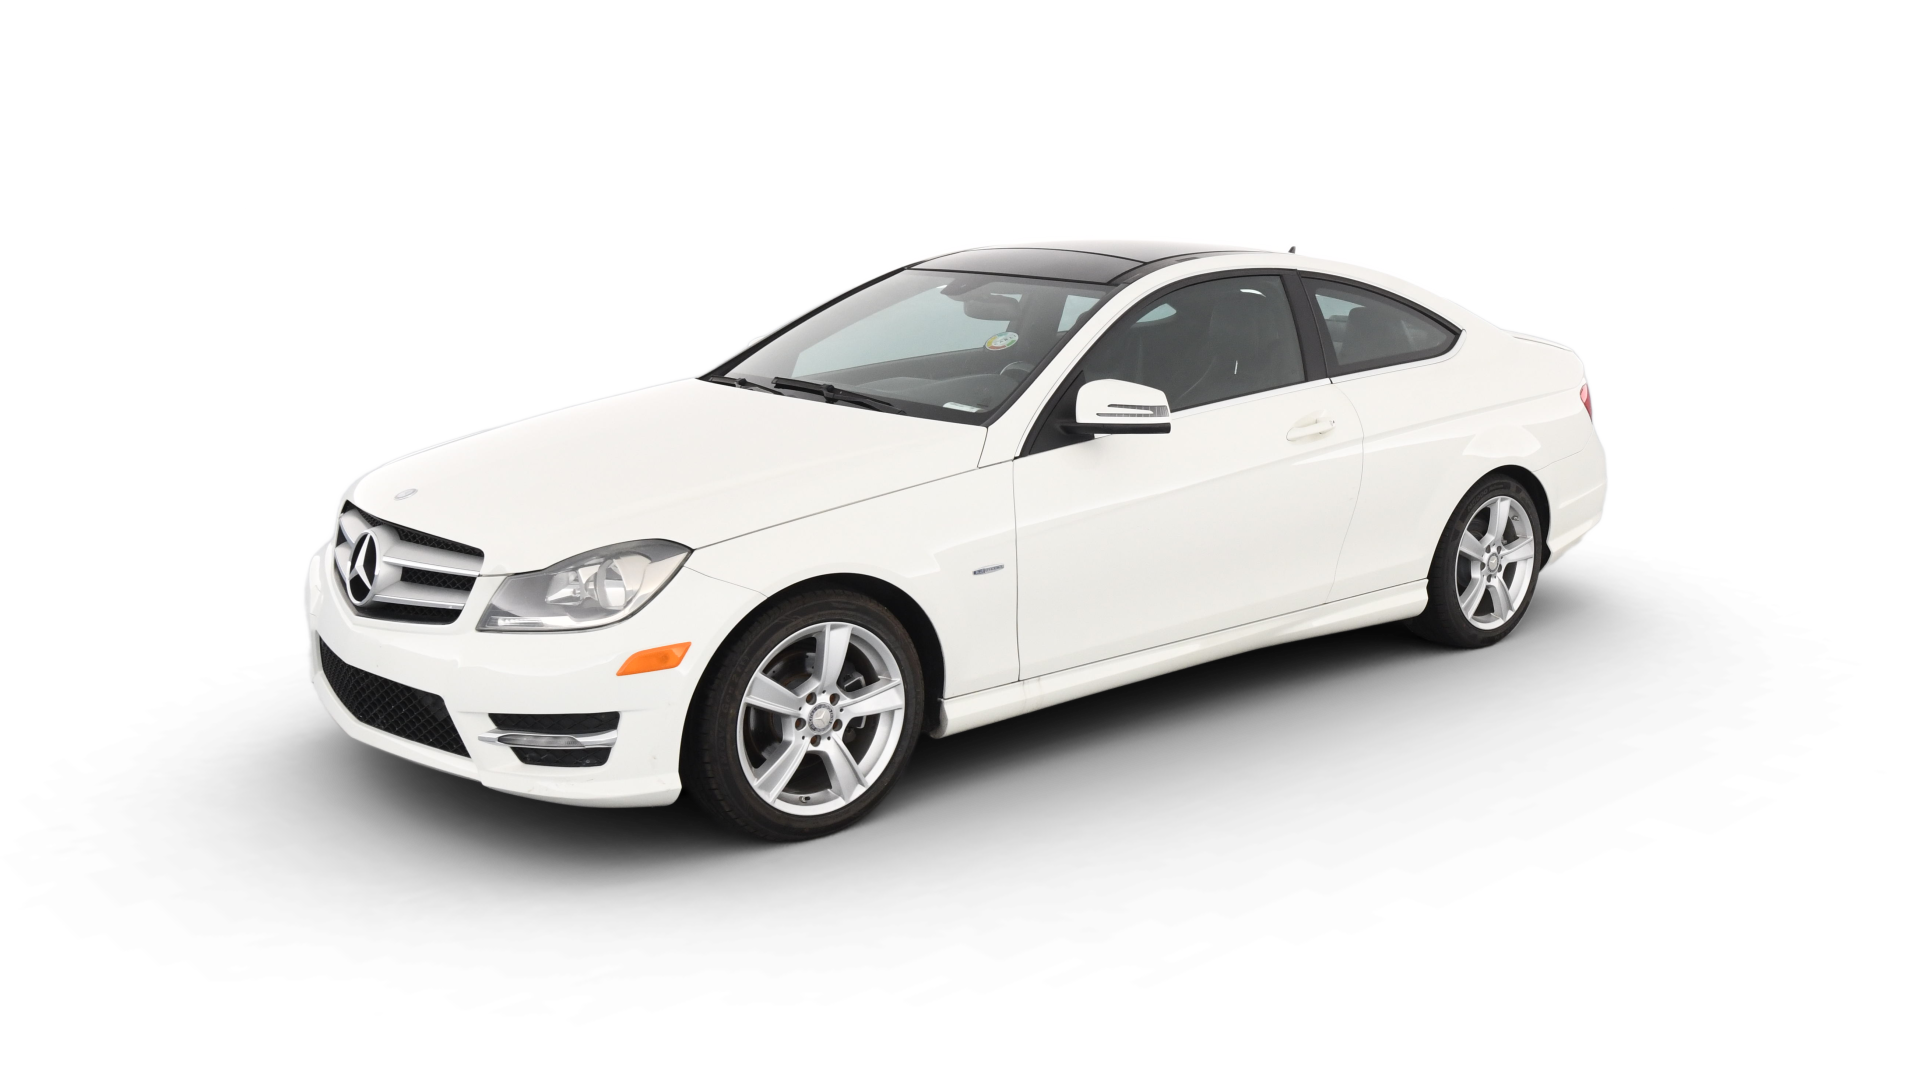 Used 2012 Mercedes-Benz C-Class For Sale Online | Carvana